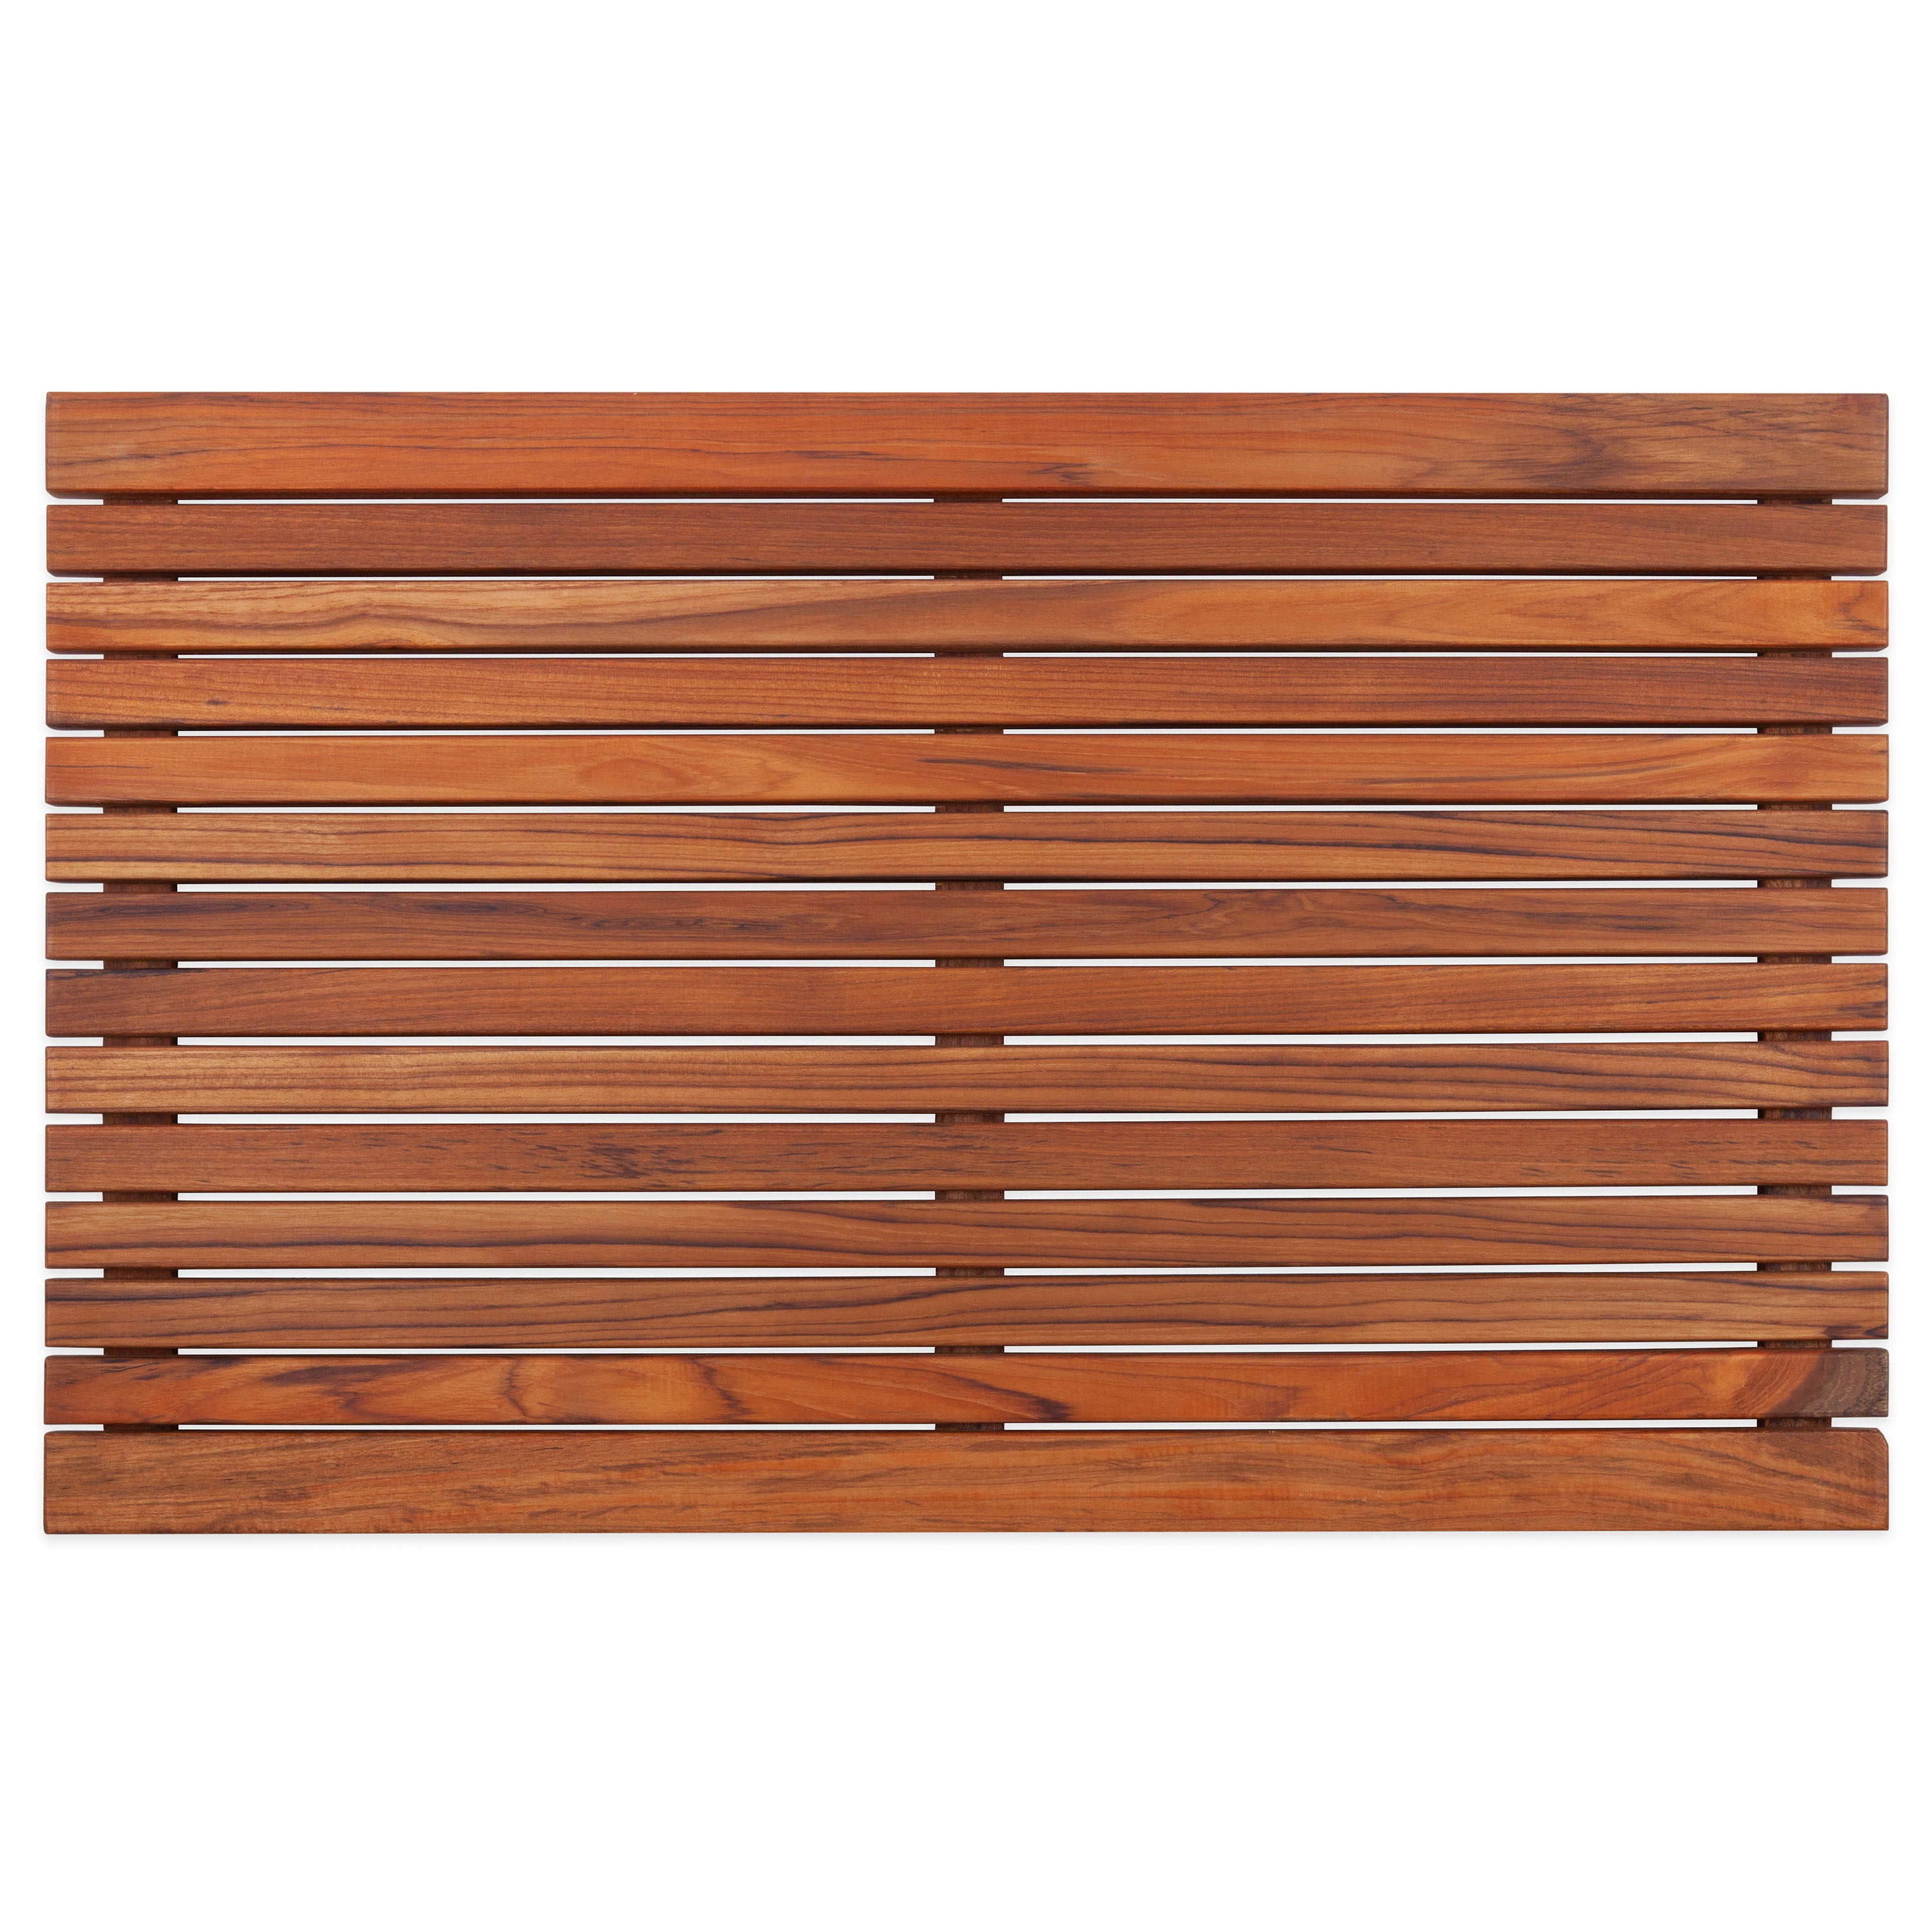 Durango Oiled Teak Shower and Bath Mat with Wide End Slat 31.4″ x 19.6″